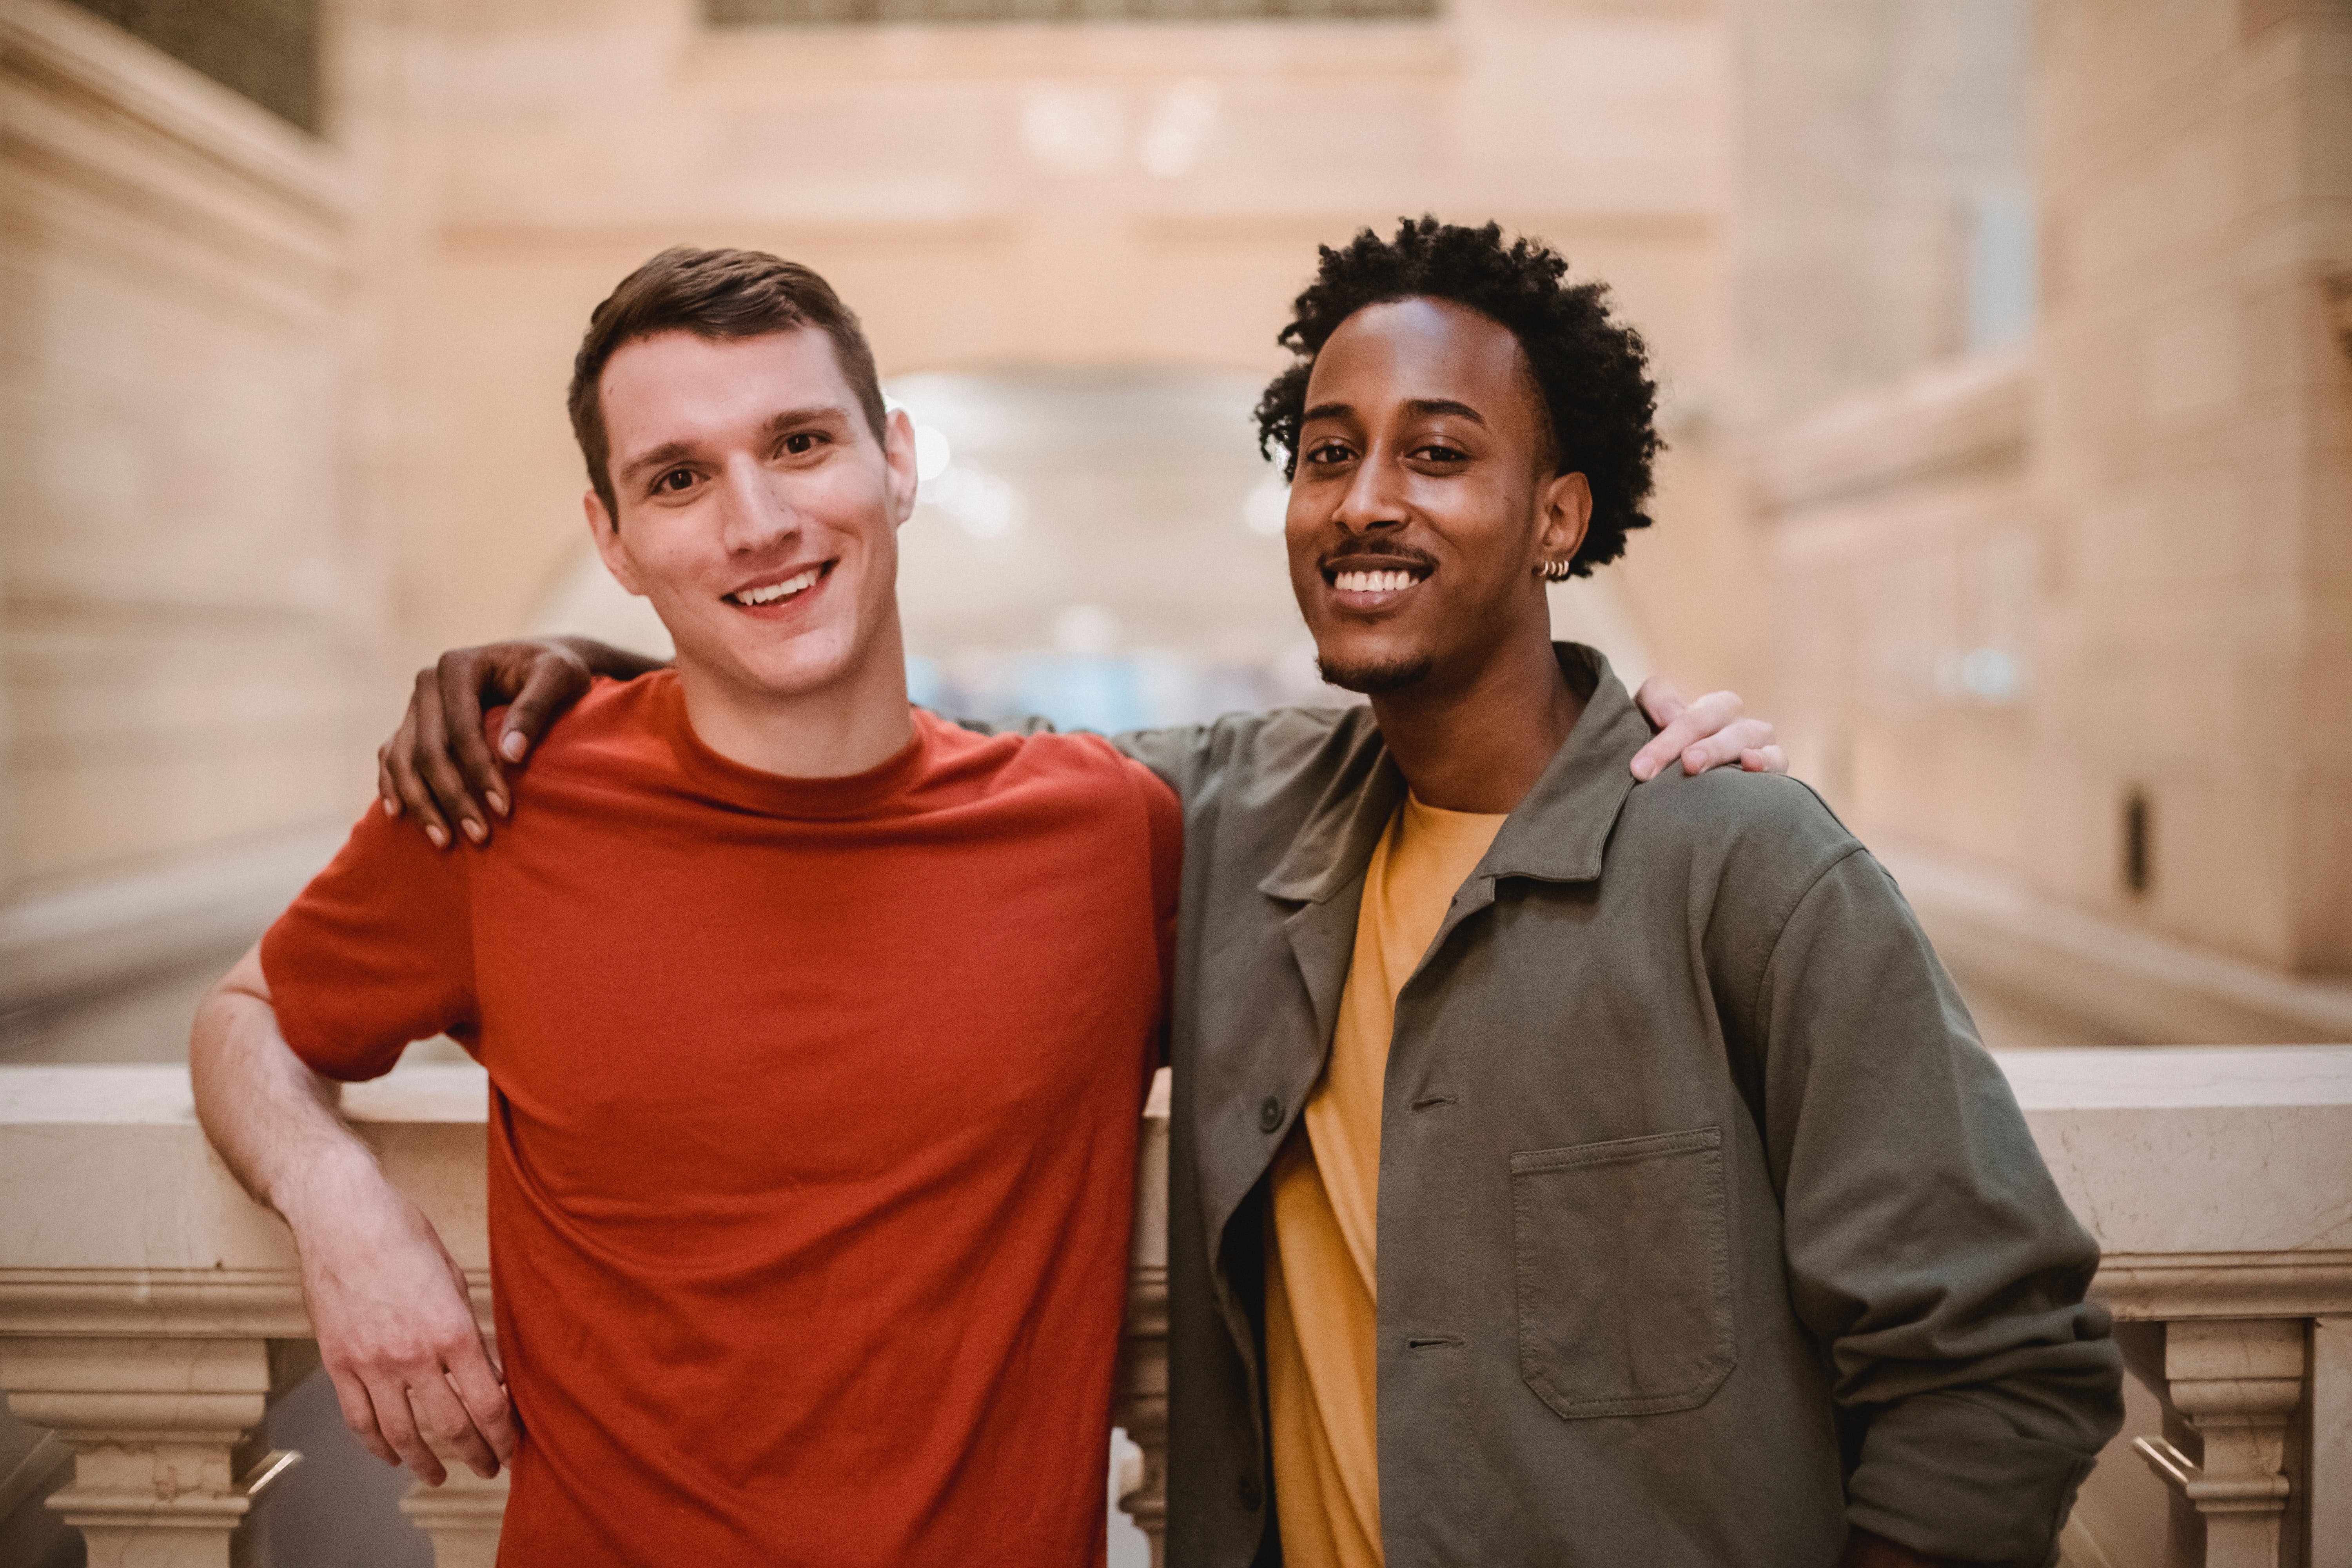 Two smiling male friends with their arms around each other | Photo: Pexels